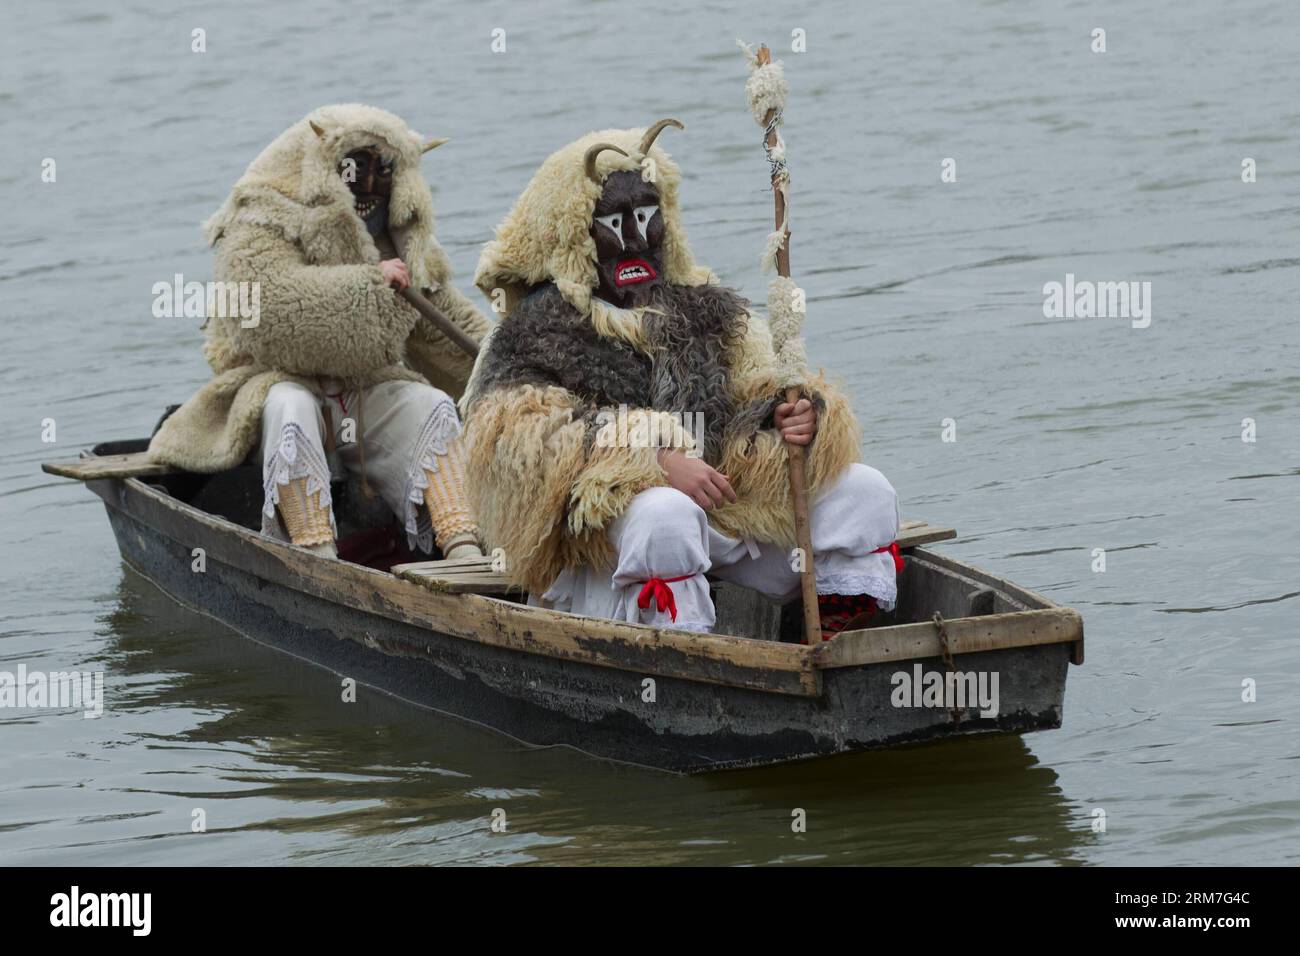 Masked busos (people wearing sheep fur and wooden masks) row across the Danube to celebrate the traditional Buso Carnival in Mohacs, southern Hungary on March 2, 2014. The Buso Carnival is an annual celebration of Sokac ethnic group living in Mohacs to bid farewell to winter and welcome spring. According to legend, local people dressed up in sheep fur and wooden masks in a bid to frighten off the Turkish invaders in the 16th century. This year s carnival takes place from February 27 till March 4. (Xinhua/Attila Volgyi) HUNGARY-MOHACS-BUSO CARNIVAL PUBLICATIONxNOTxINxCHN   Masked  Celebrities W Stock Photo